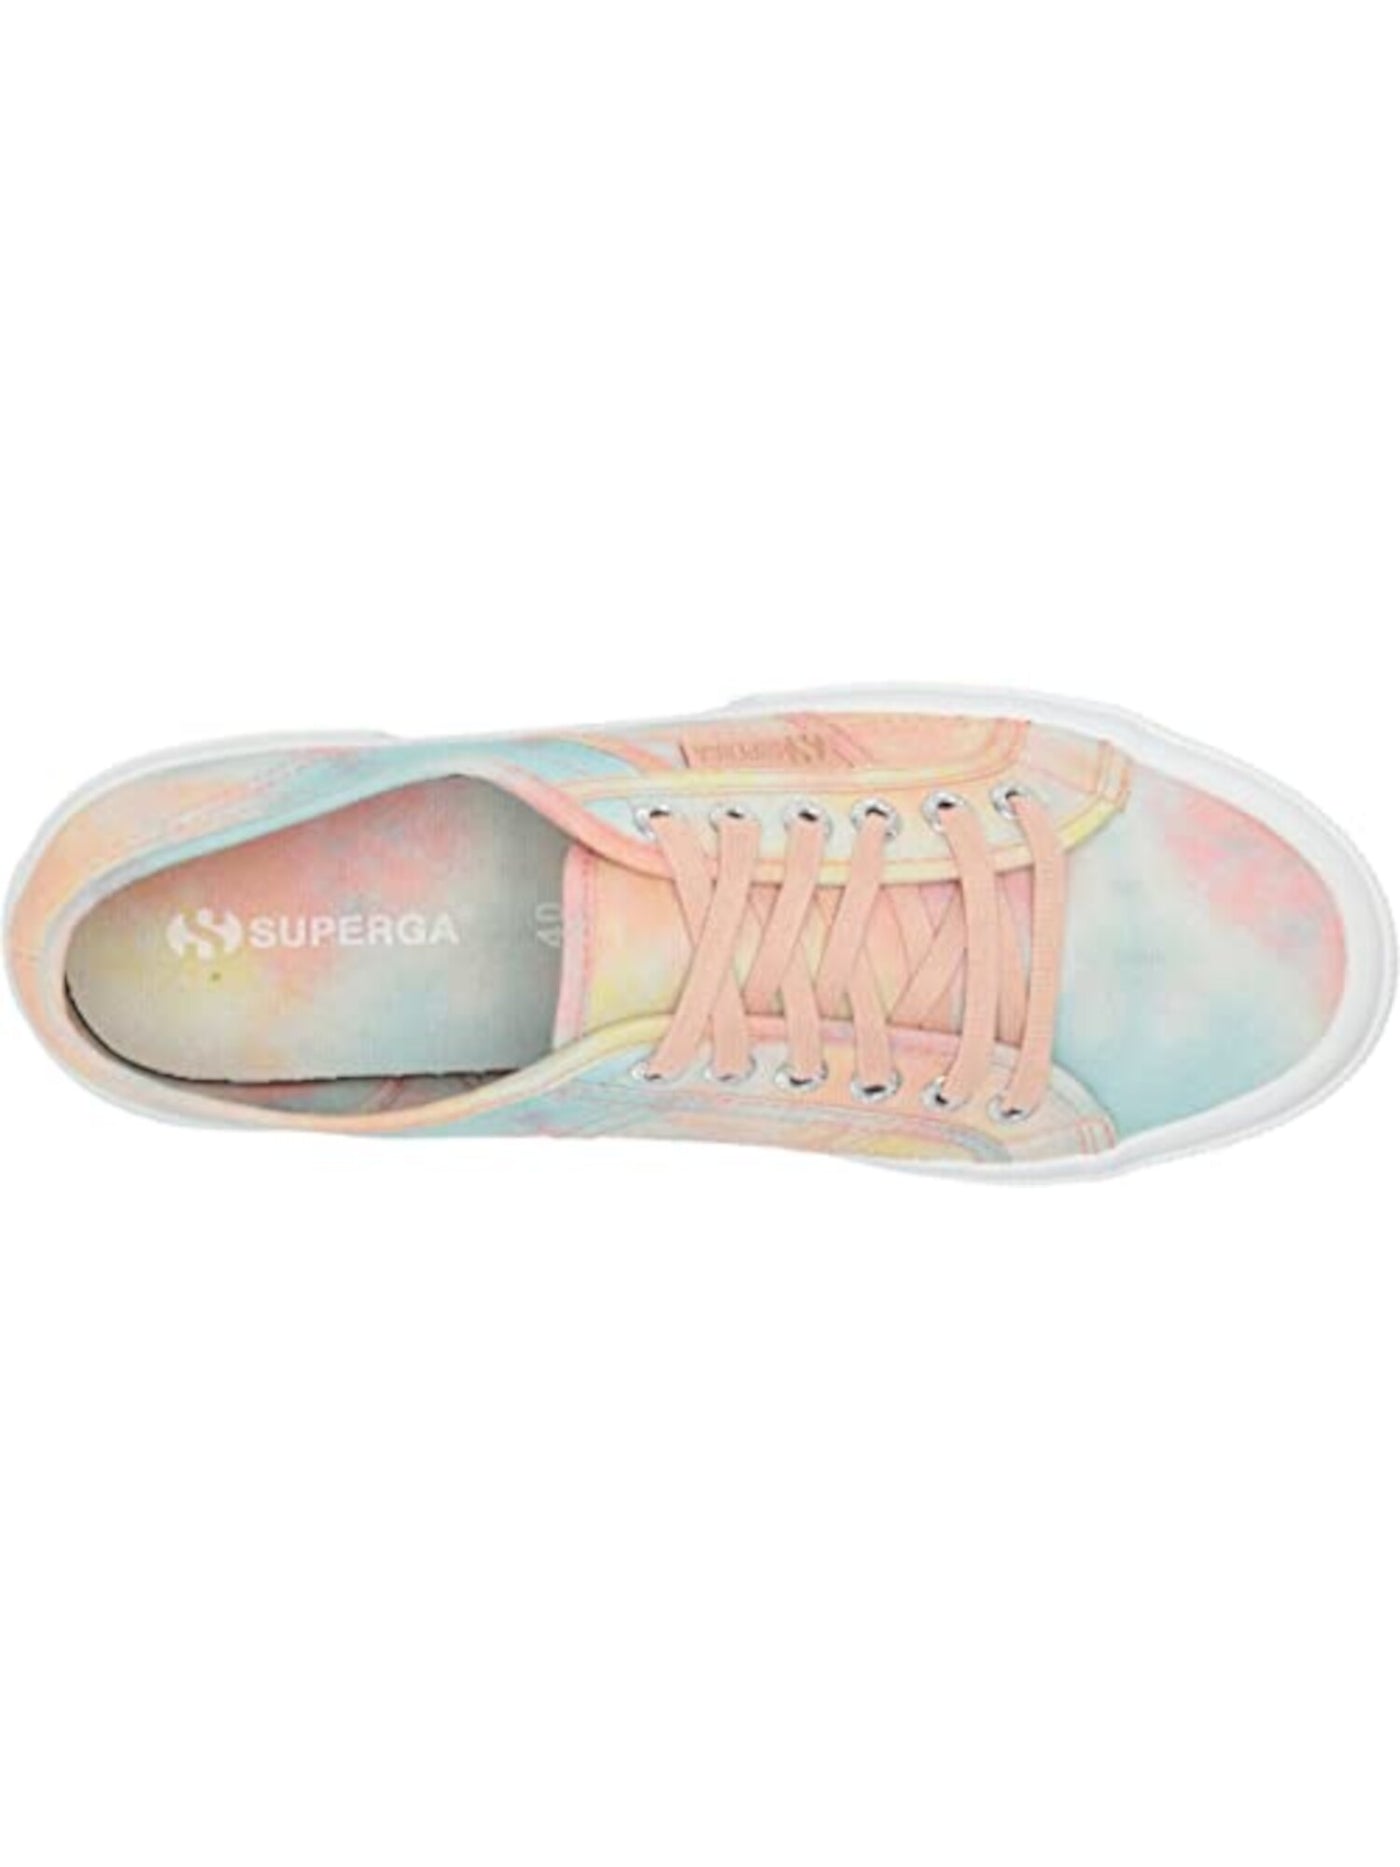 SUPERGA Womens Orange Tie Dye Traction Metal Eyelets Cushioned Logo Fantasy Cotu Round Toe Lace-Up Athletic Sneakers Shoes 39.5